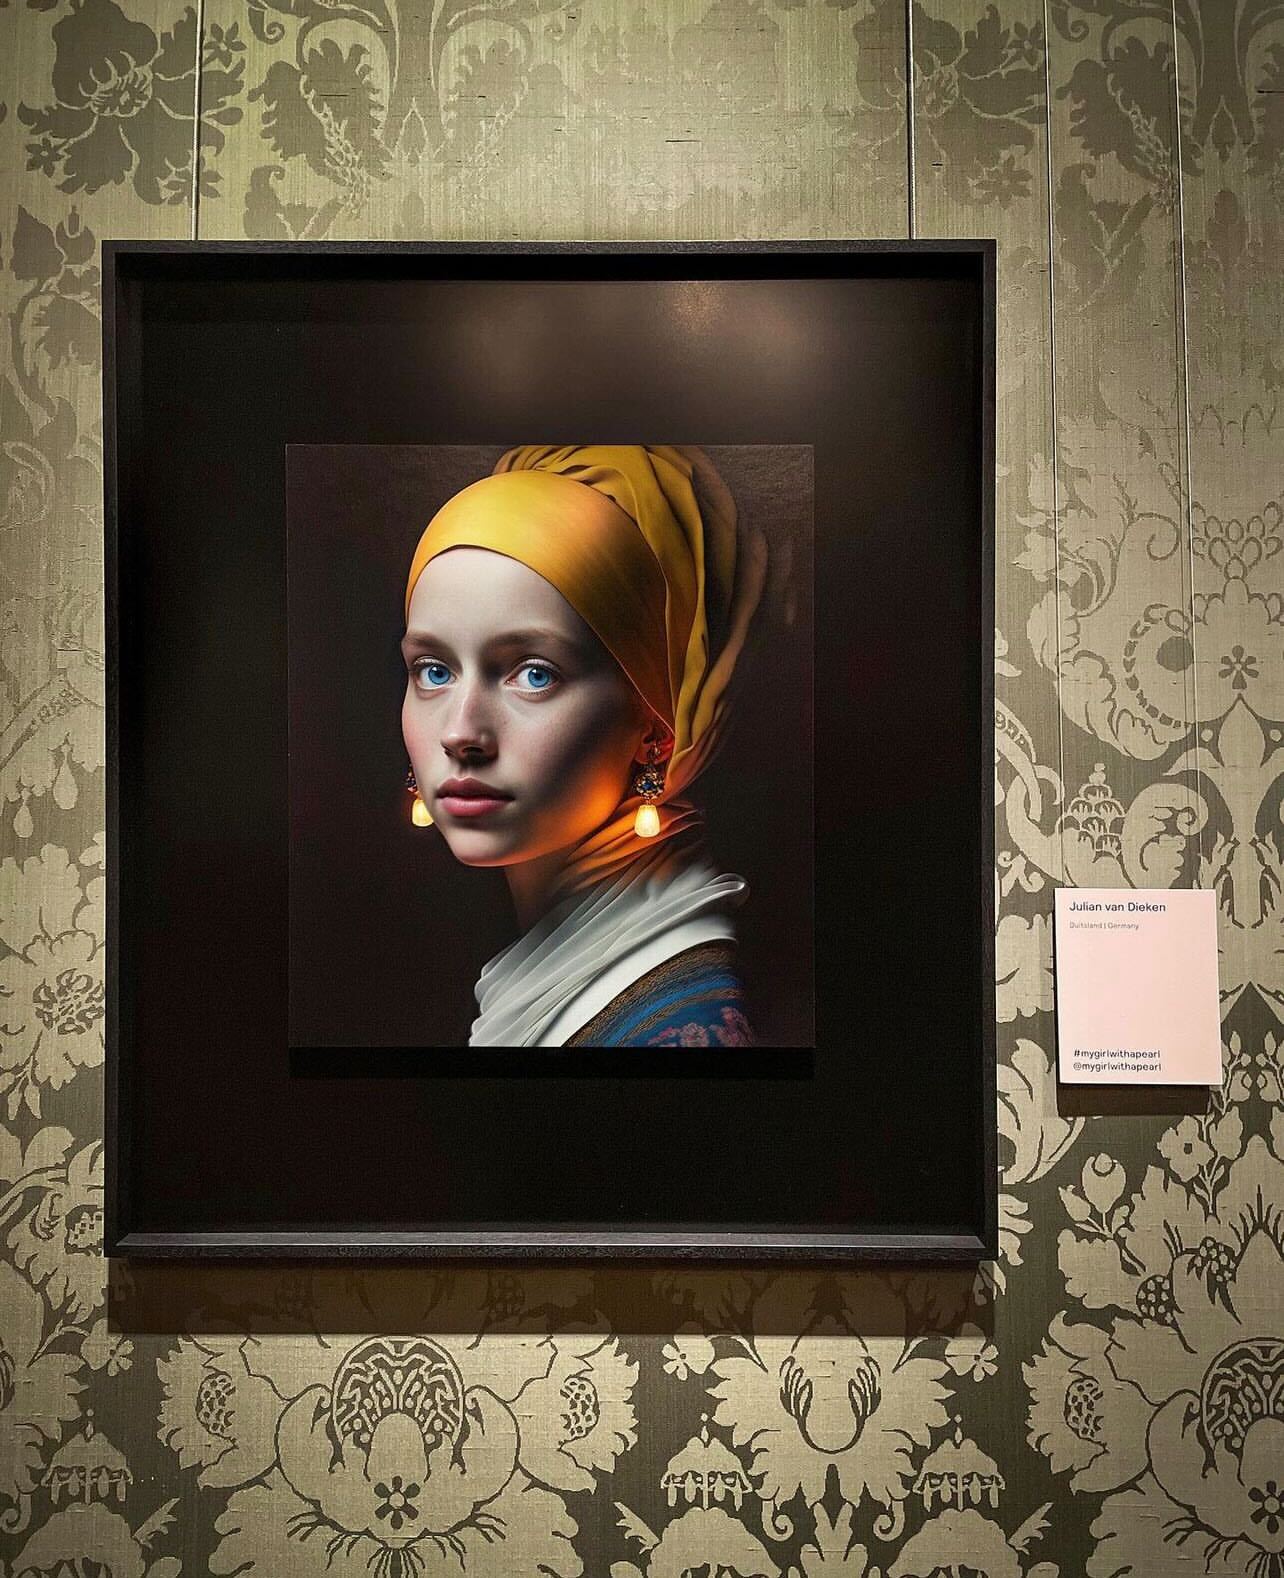 The Girl With The Pearl Earring By Johannes Vermeer  Sweetandspark